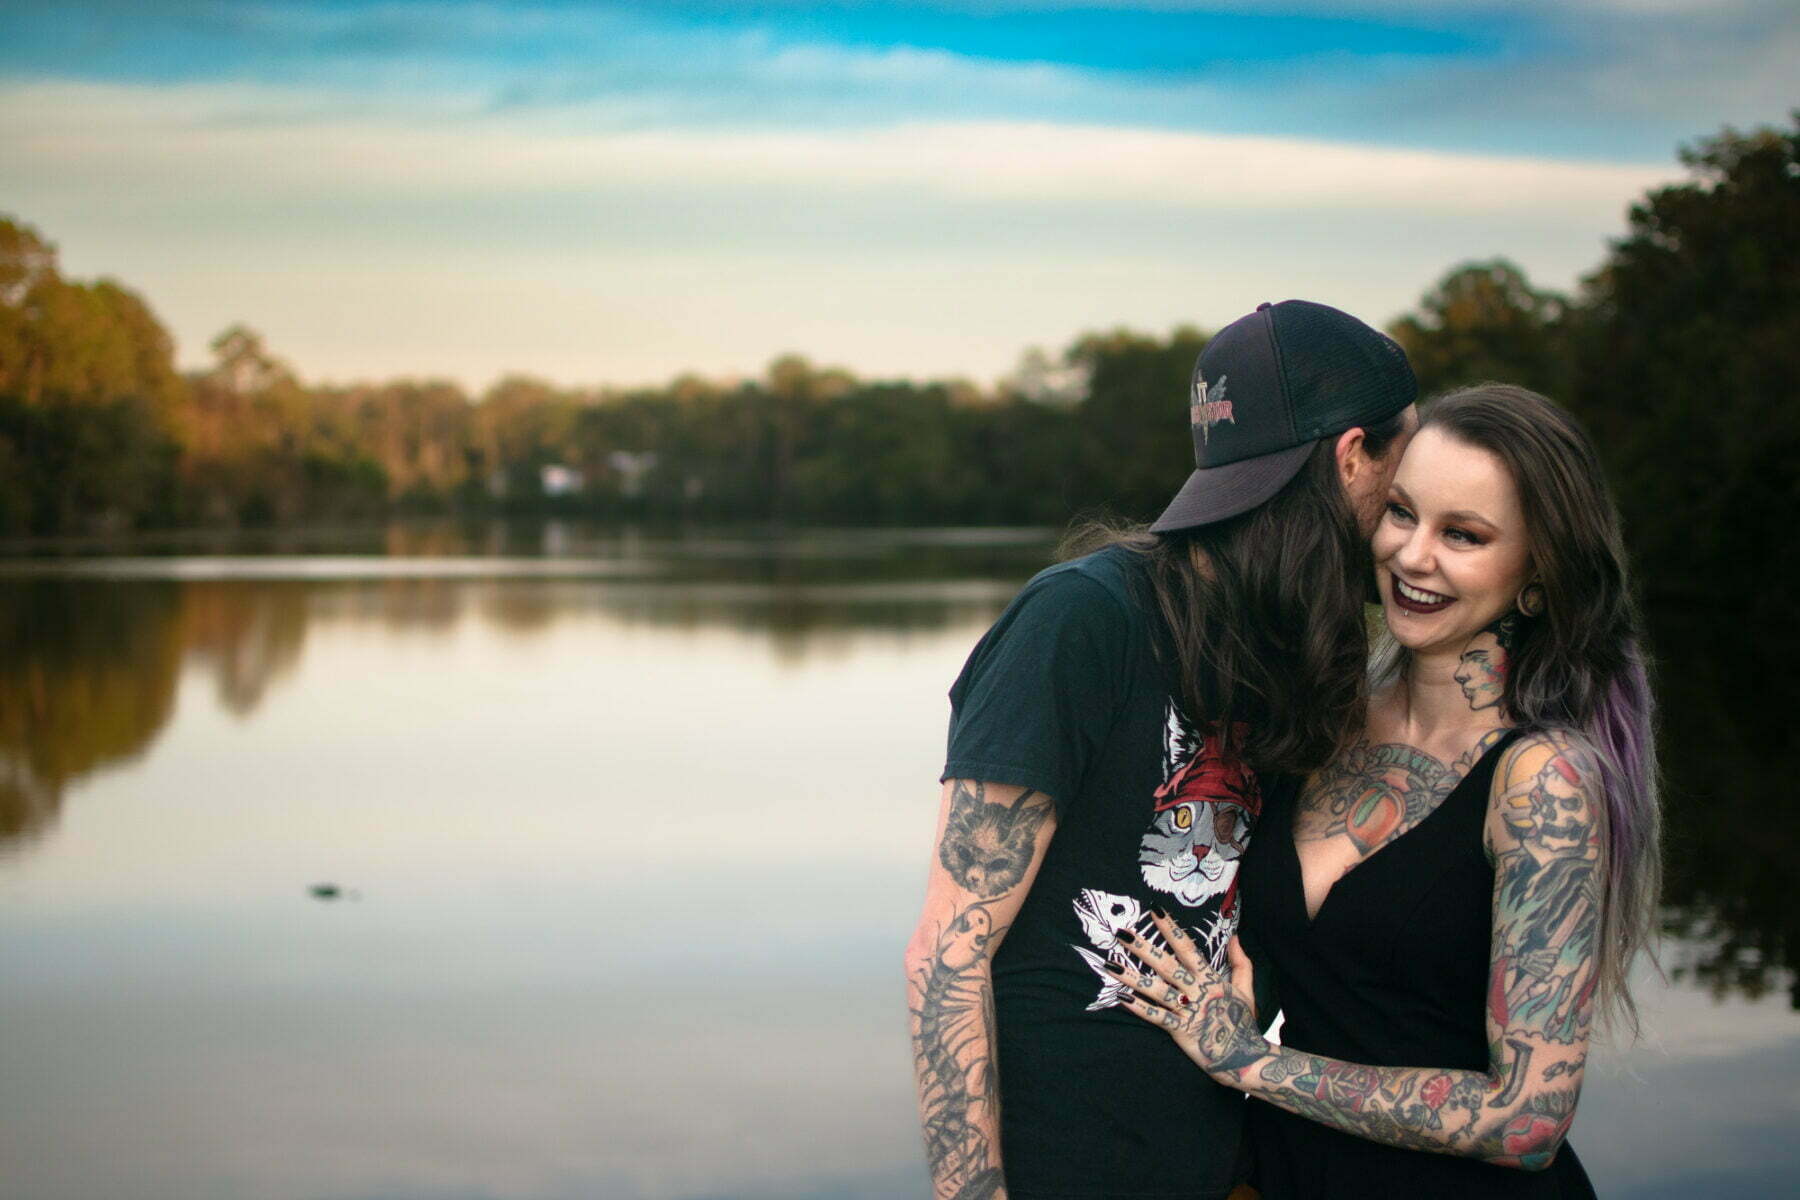 Surprise proposal engagement photography session along the Shallotte River in North Carolina.